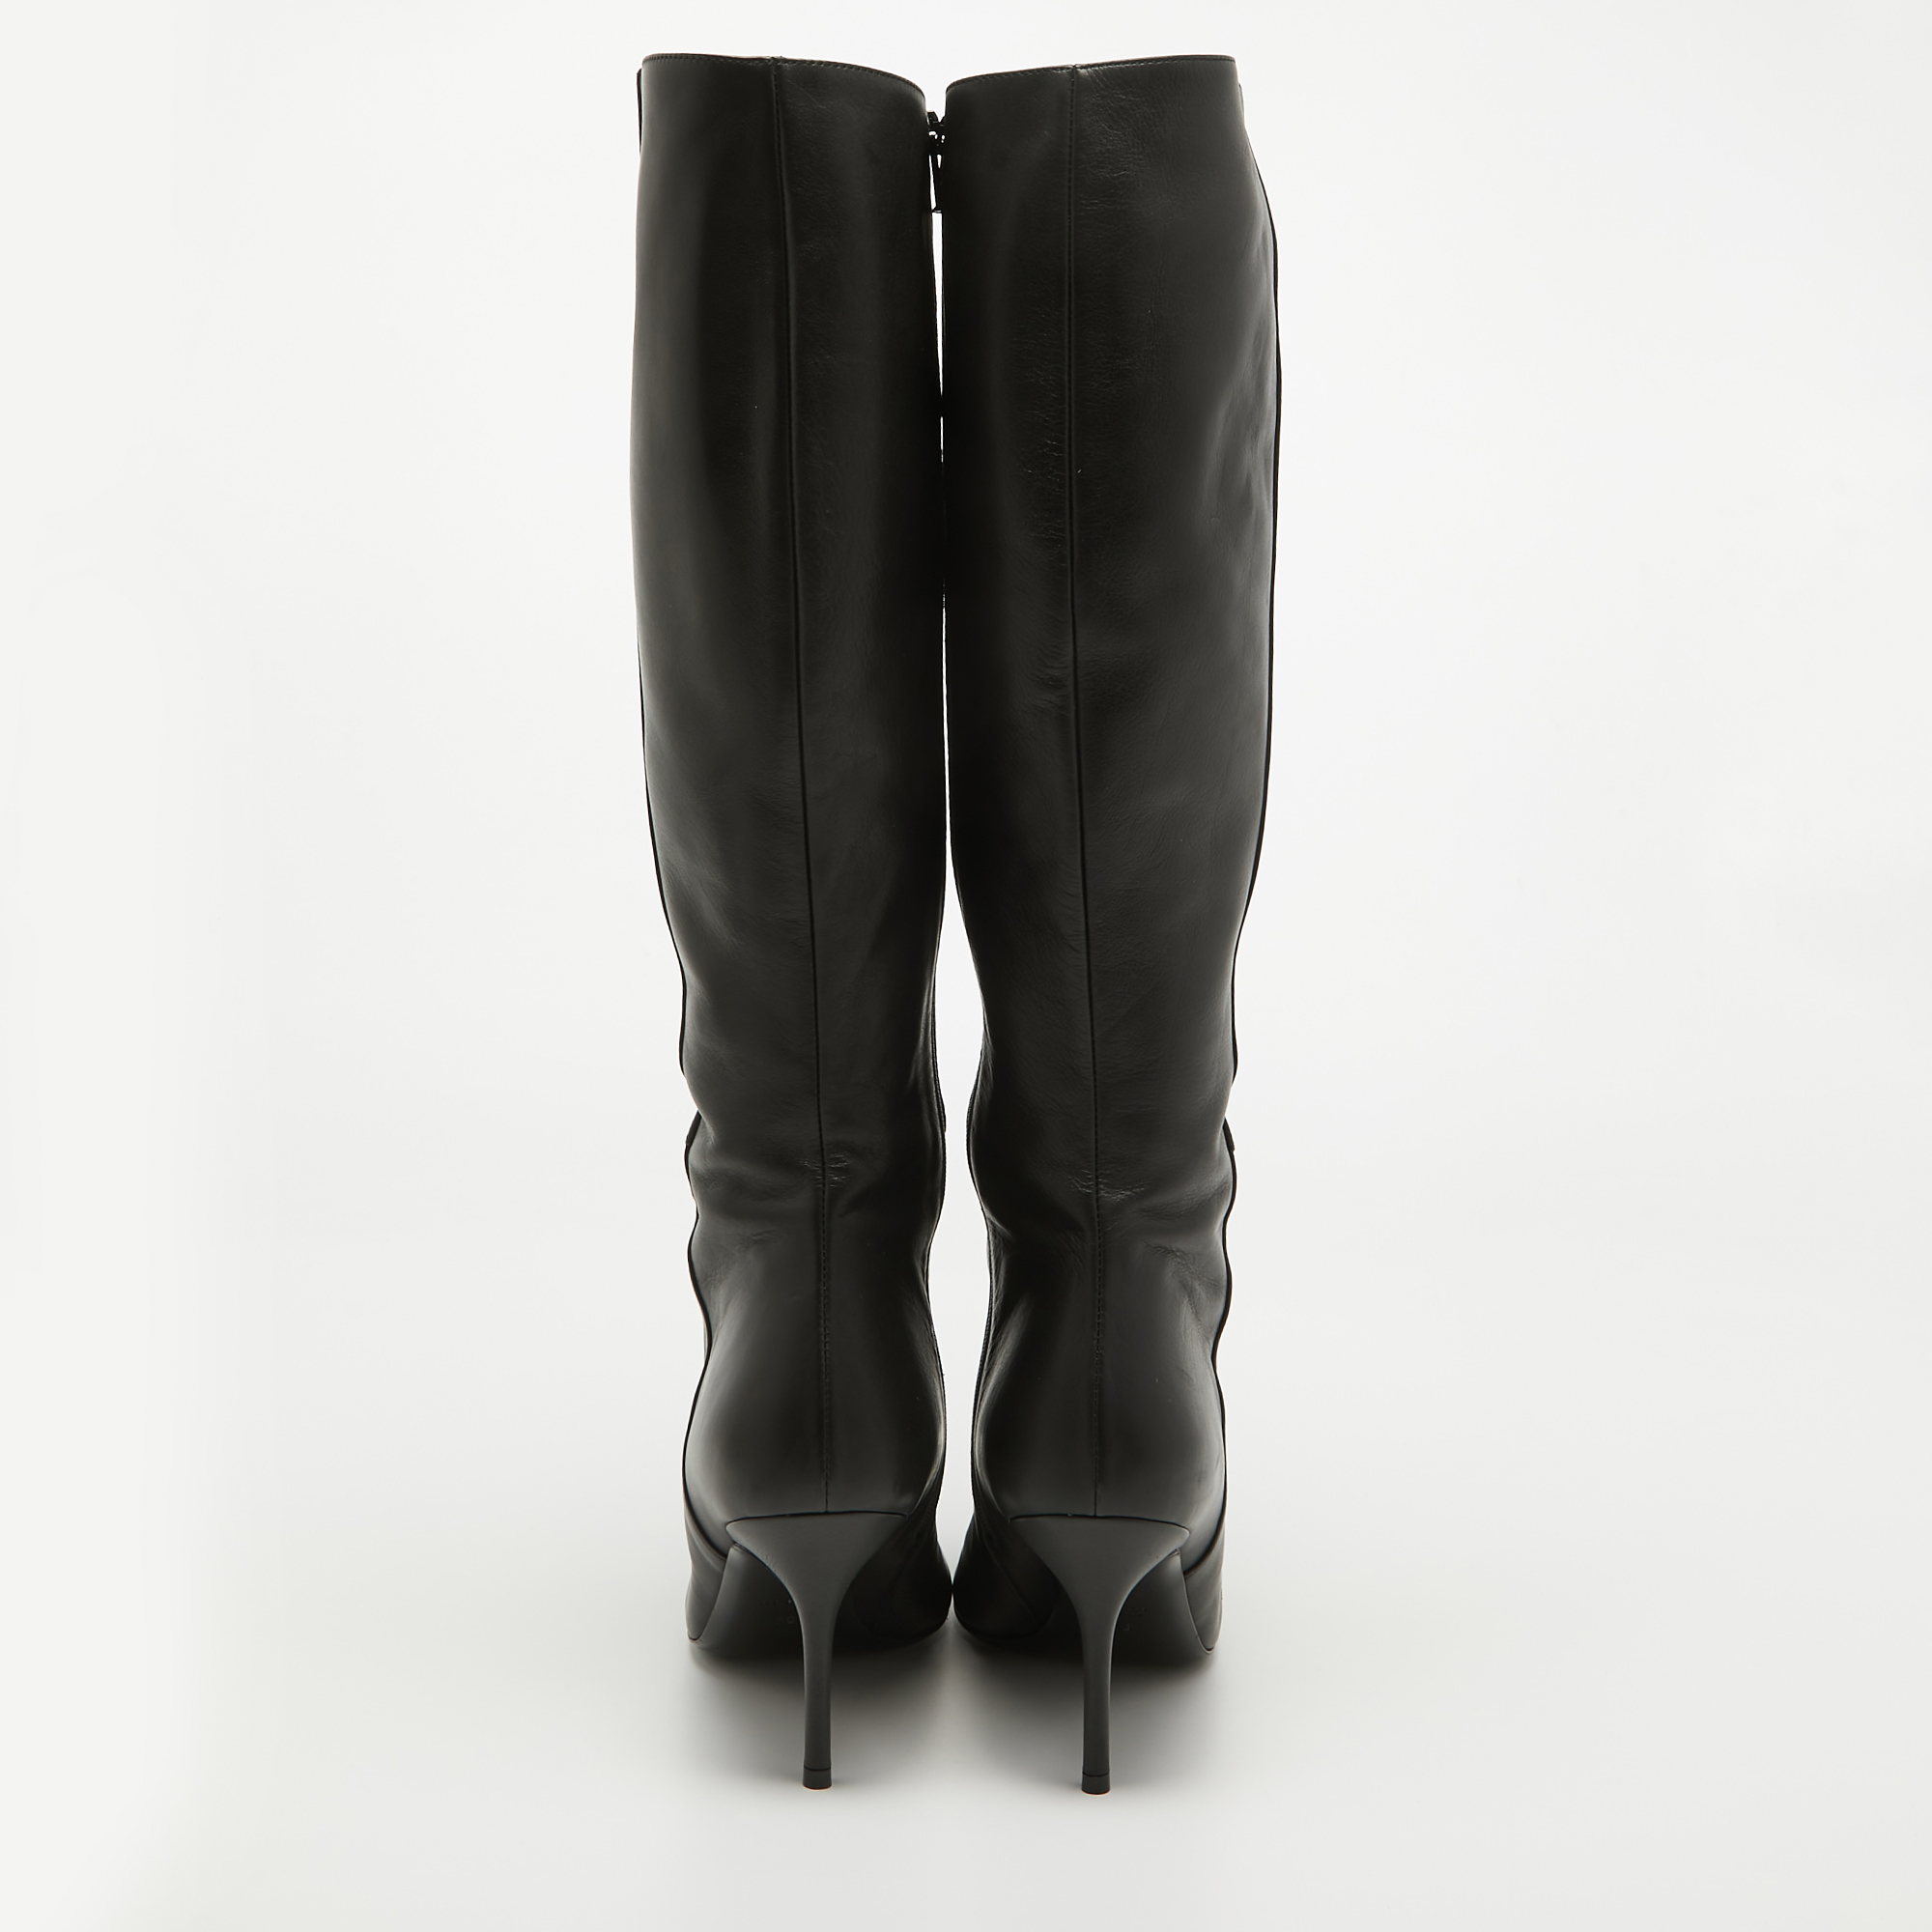 Gucci Black Leather Knee Length Boots Size 40